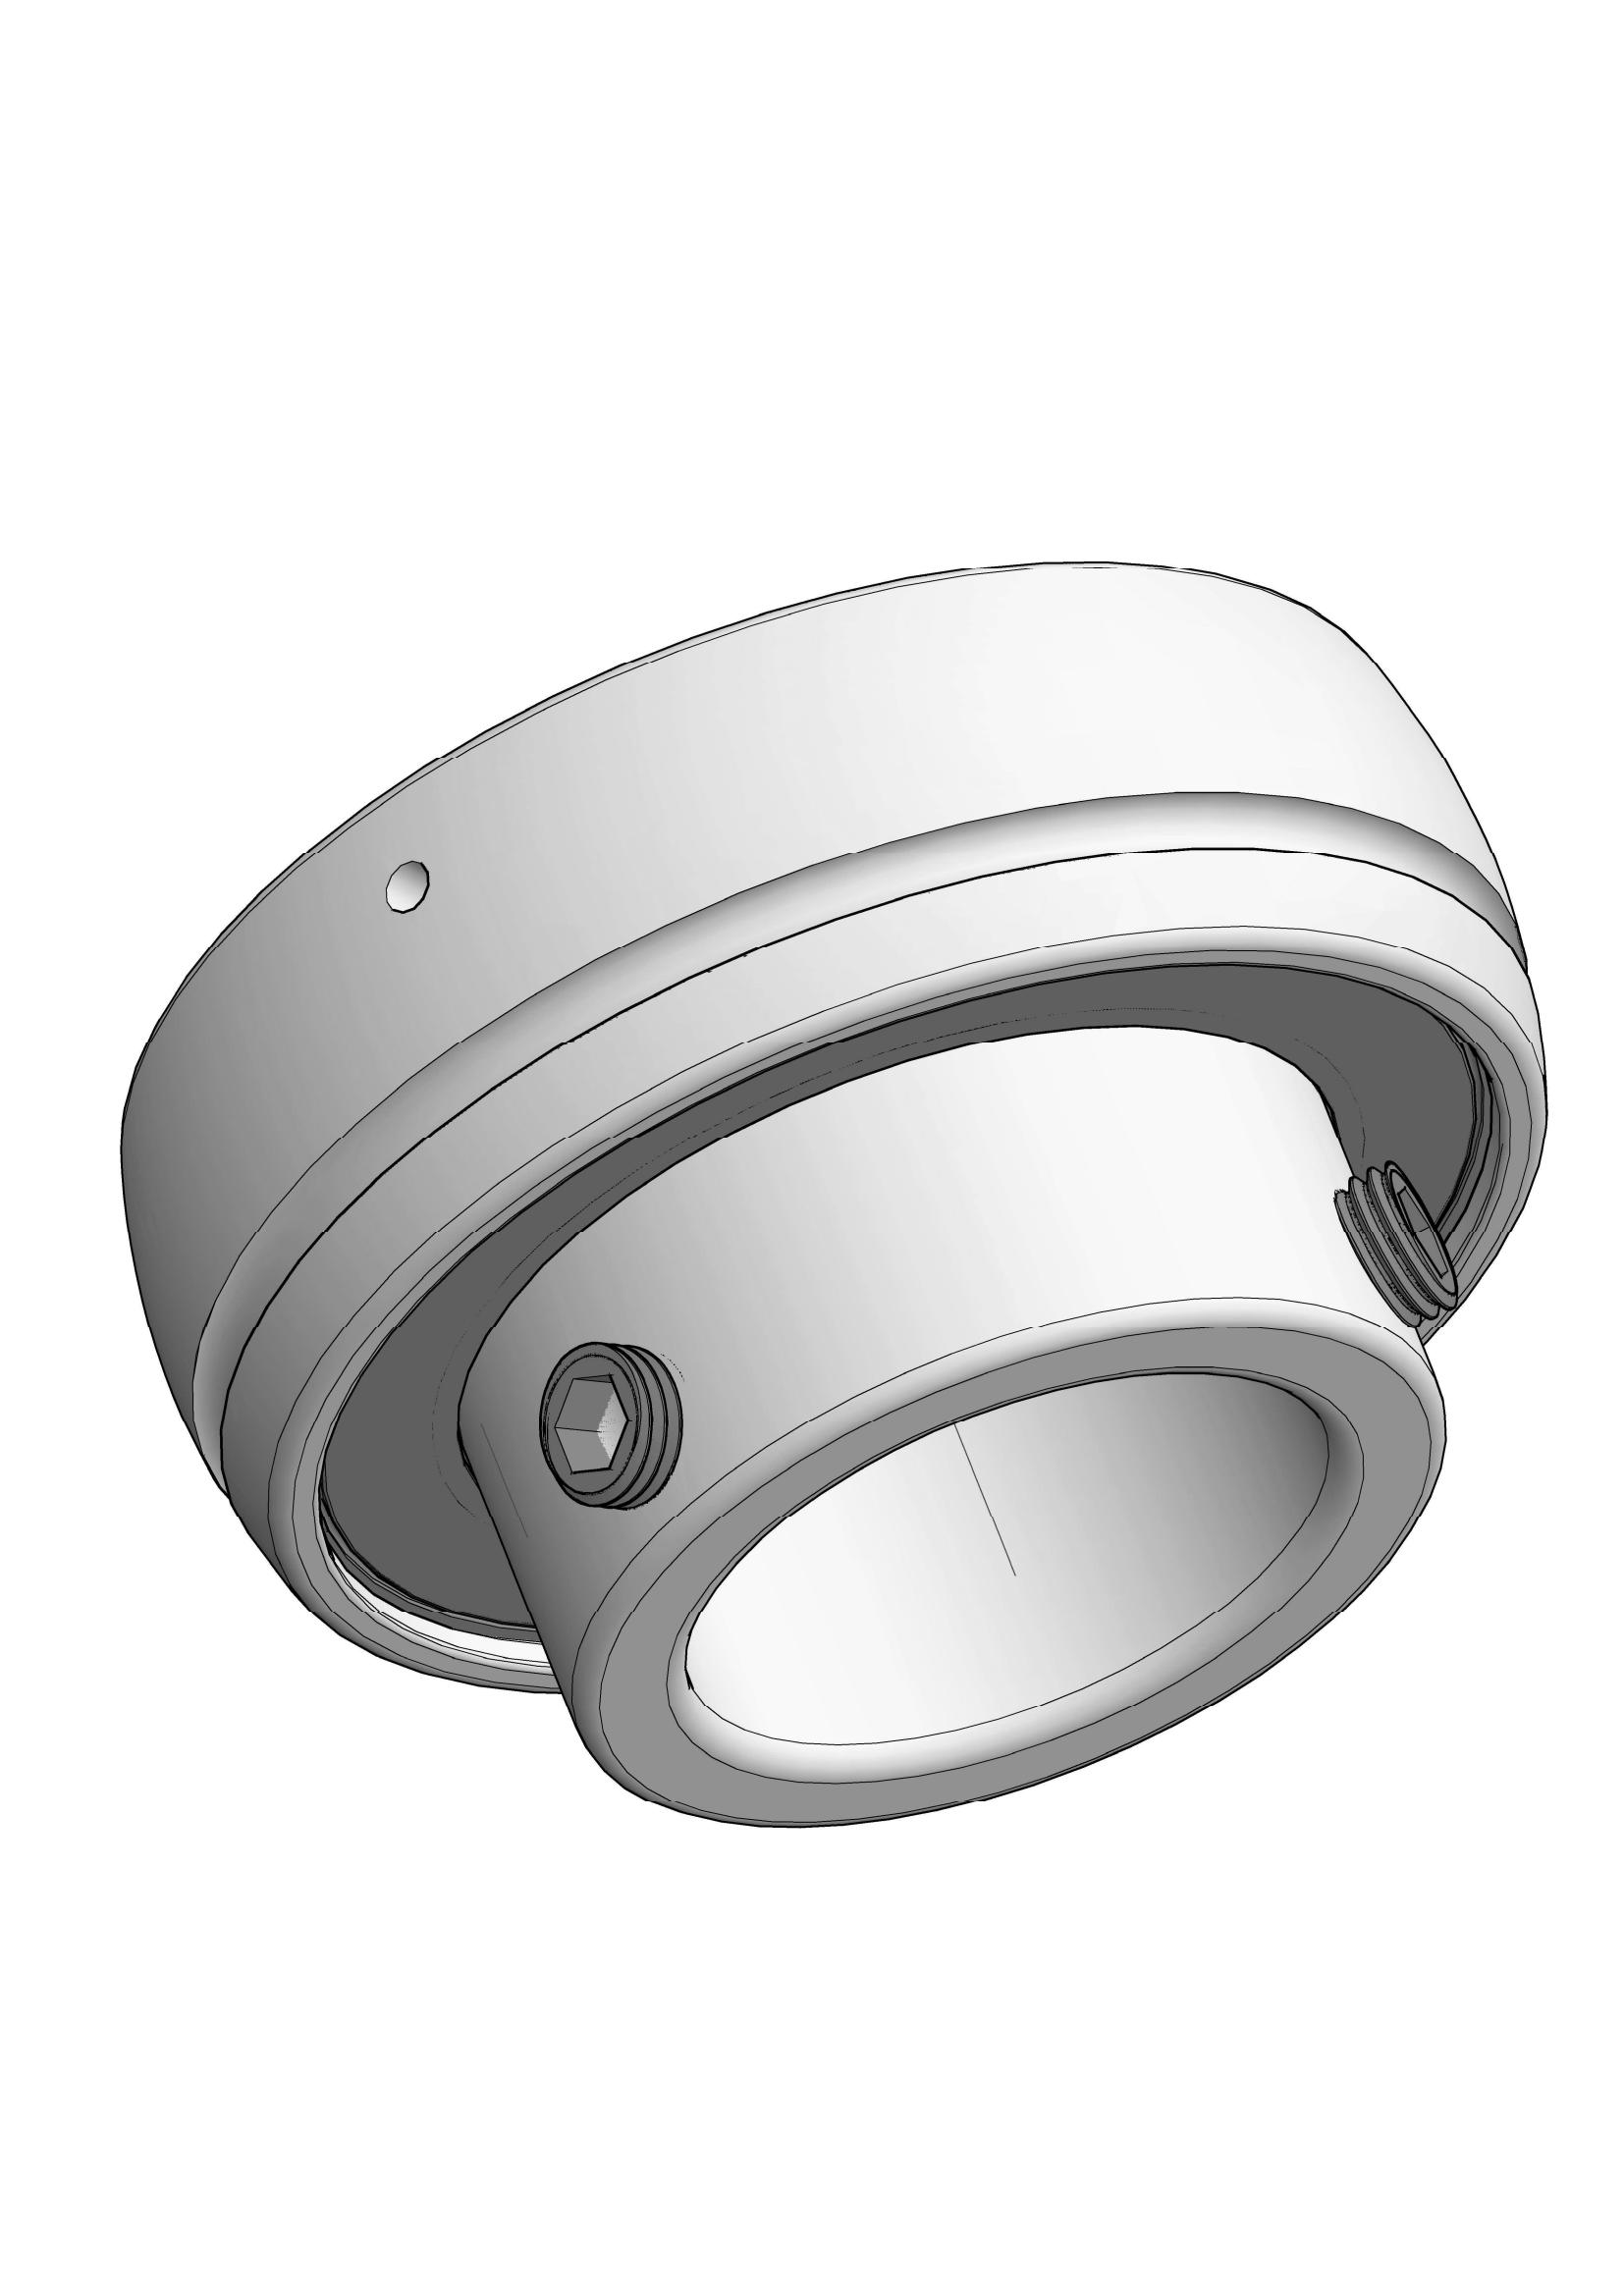 SB210-32 insert ball bearings with Eccentric Collar Lock with 2 inch Bore